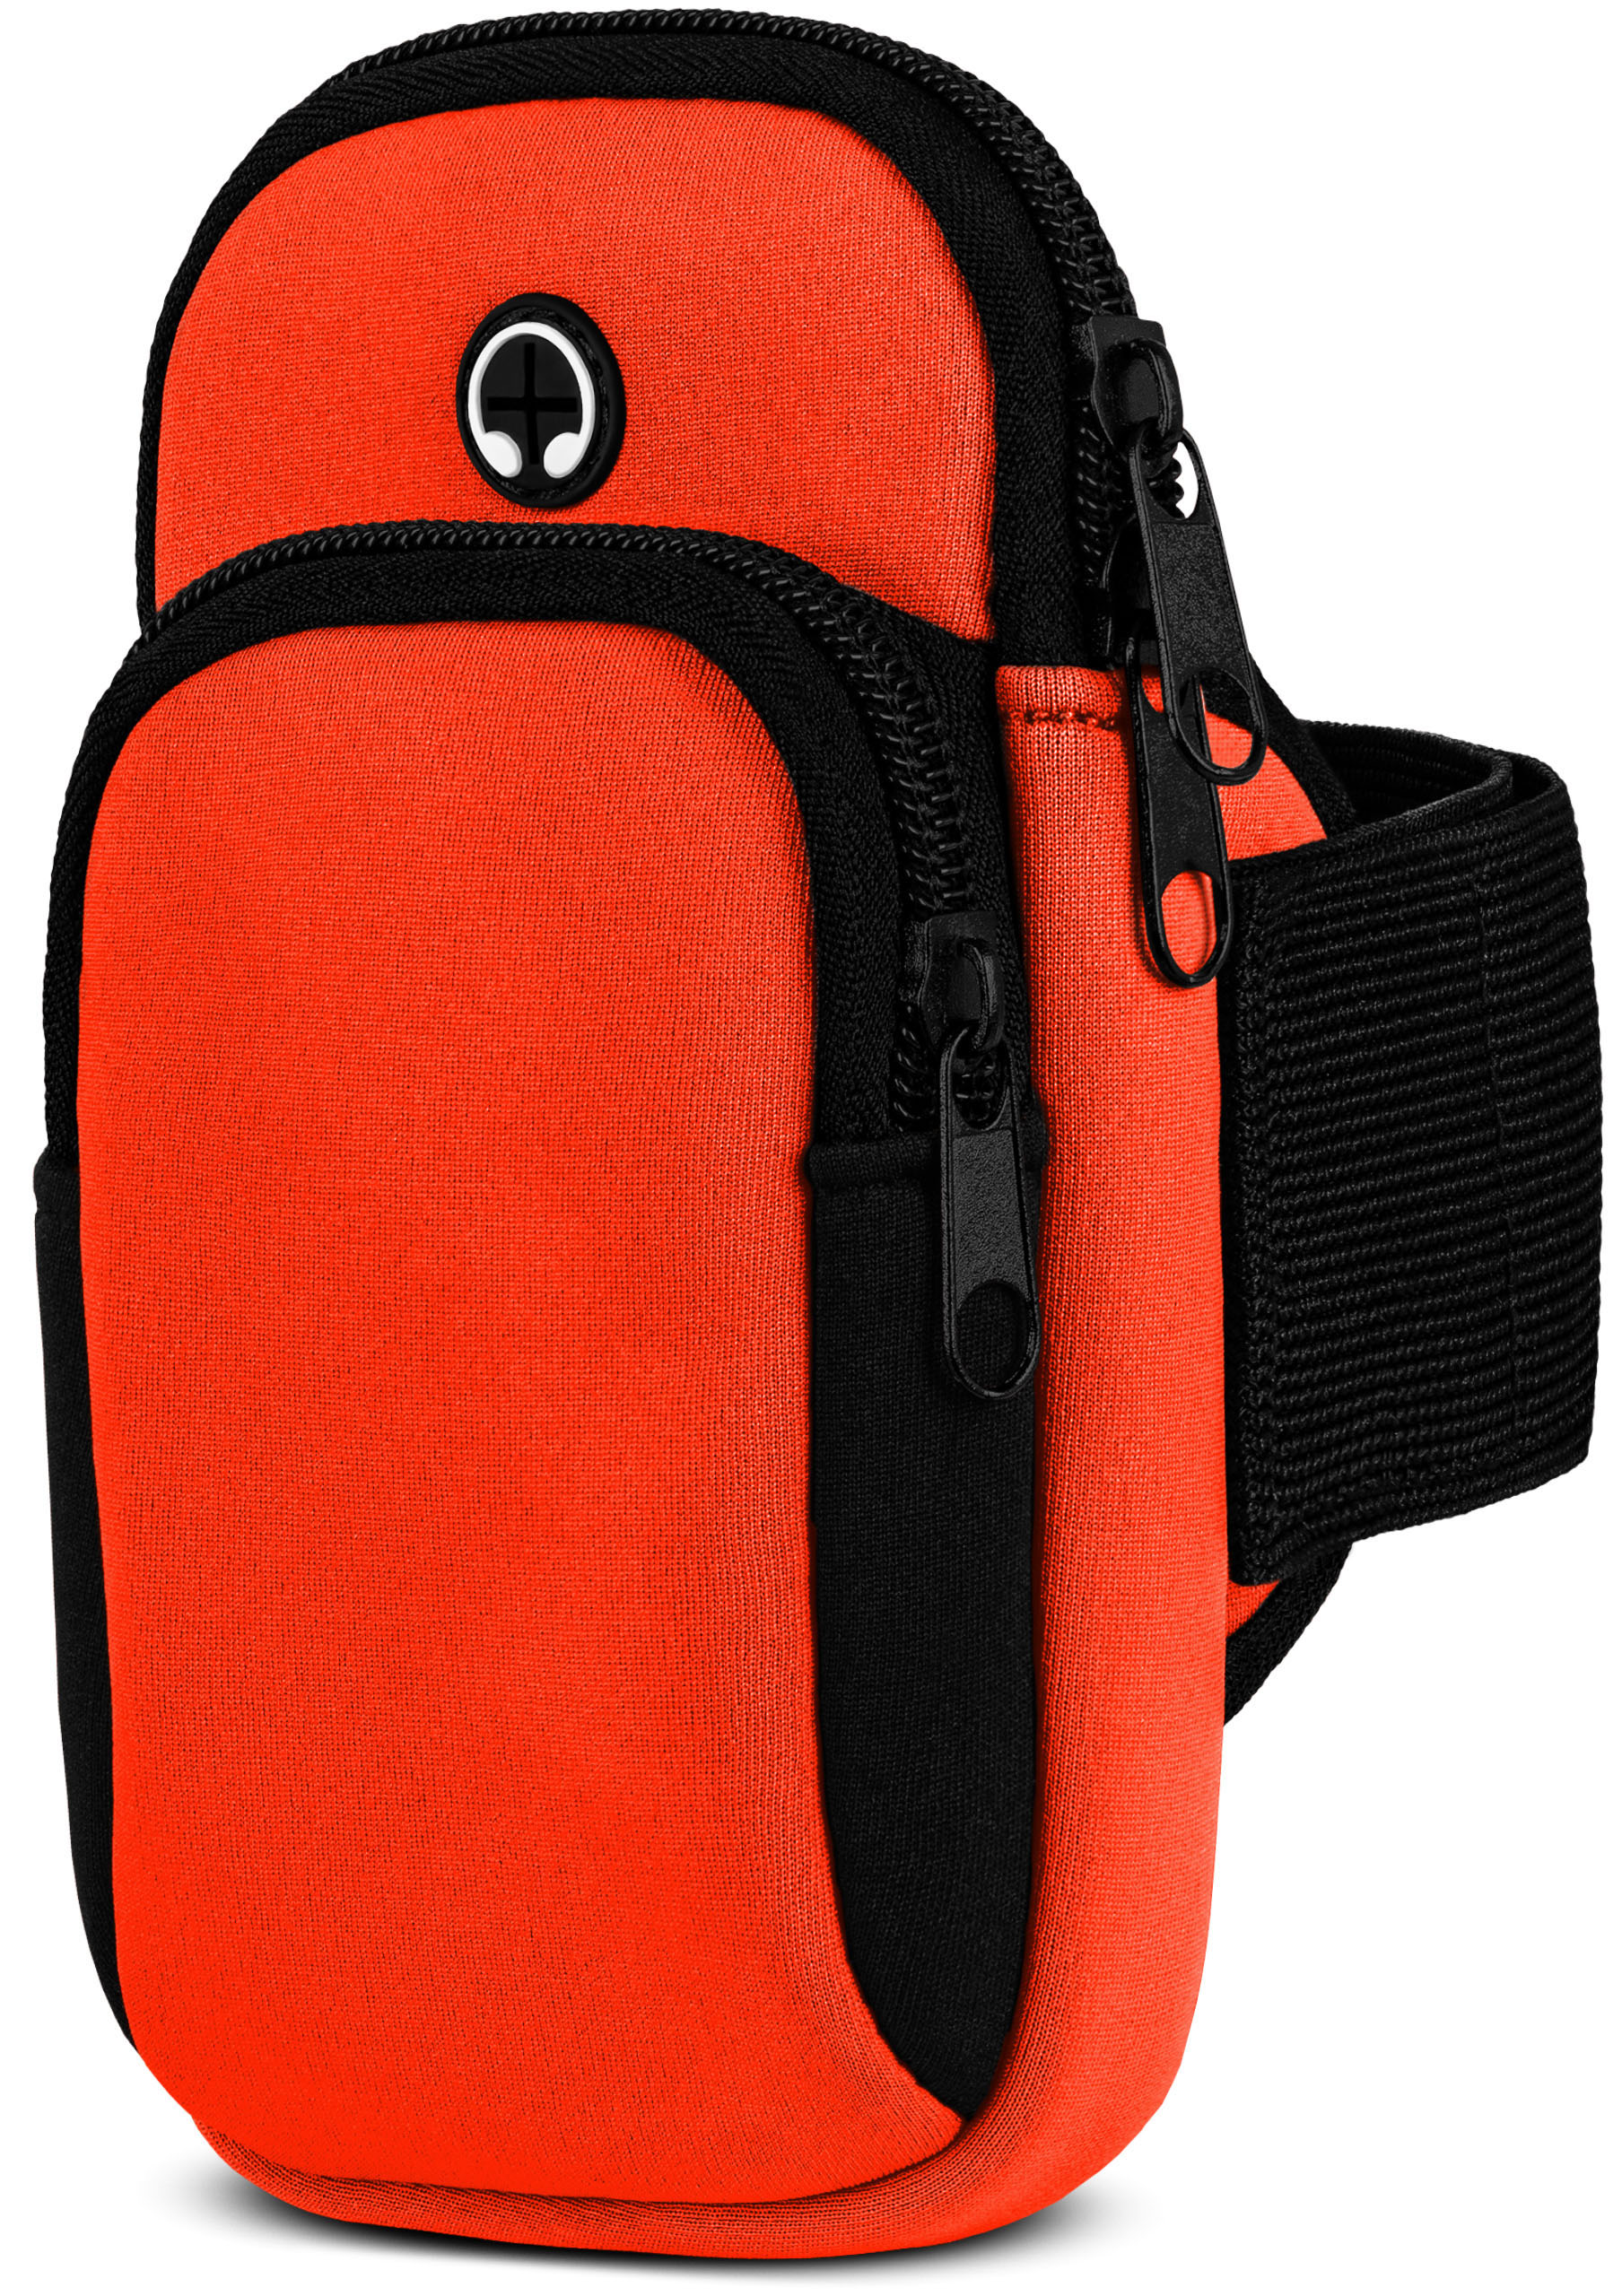 Compact, Full Cover, Armband, Orange Z5 MOEX Sport Xperia Sony,